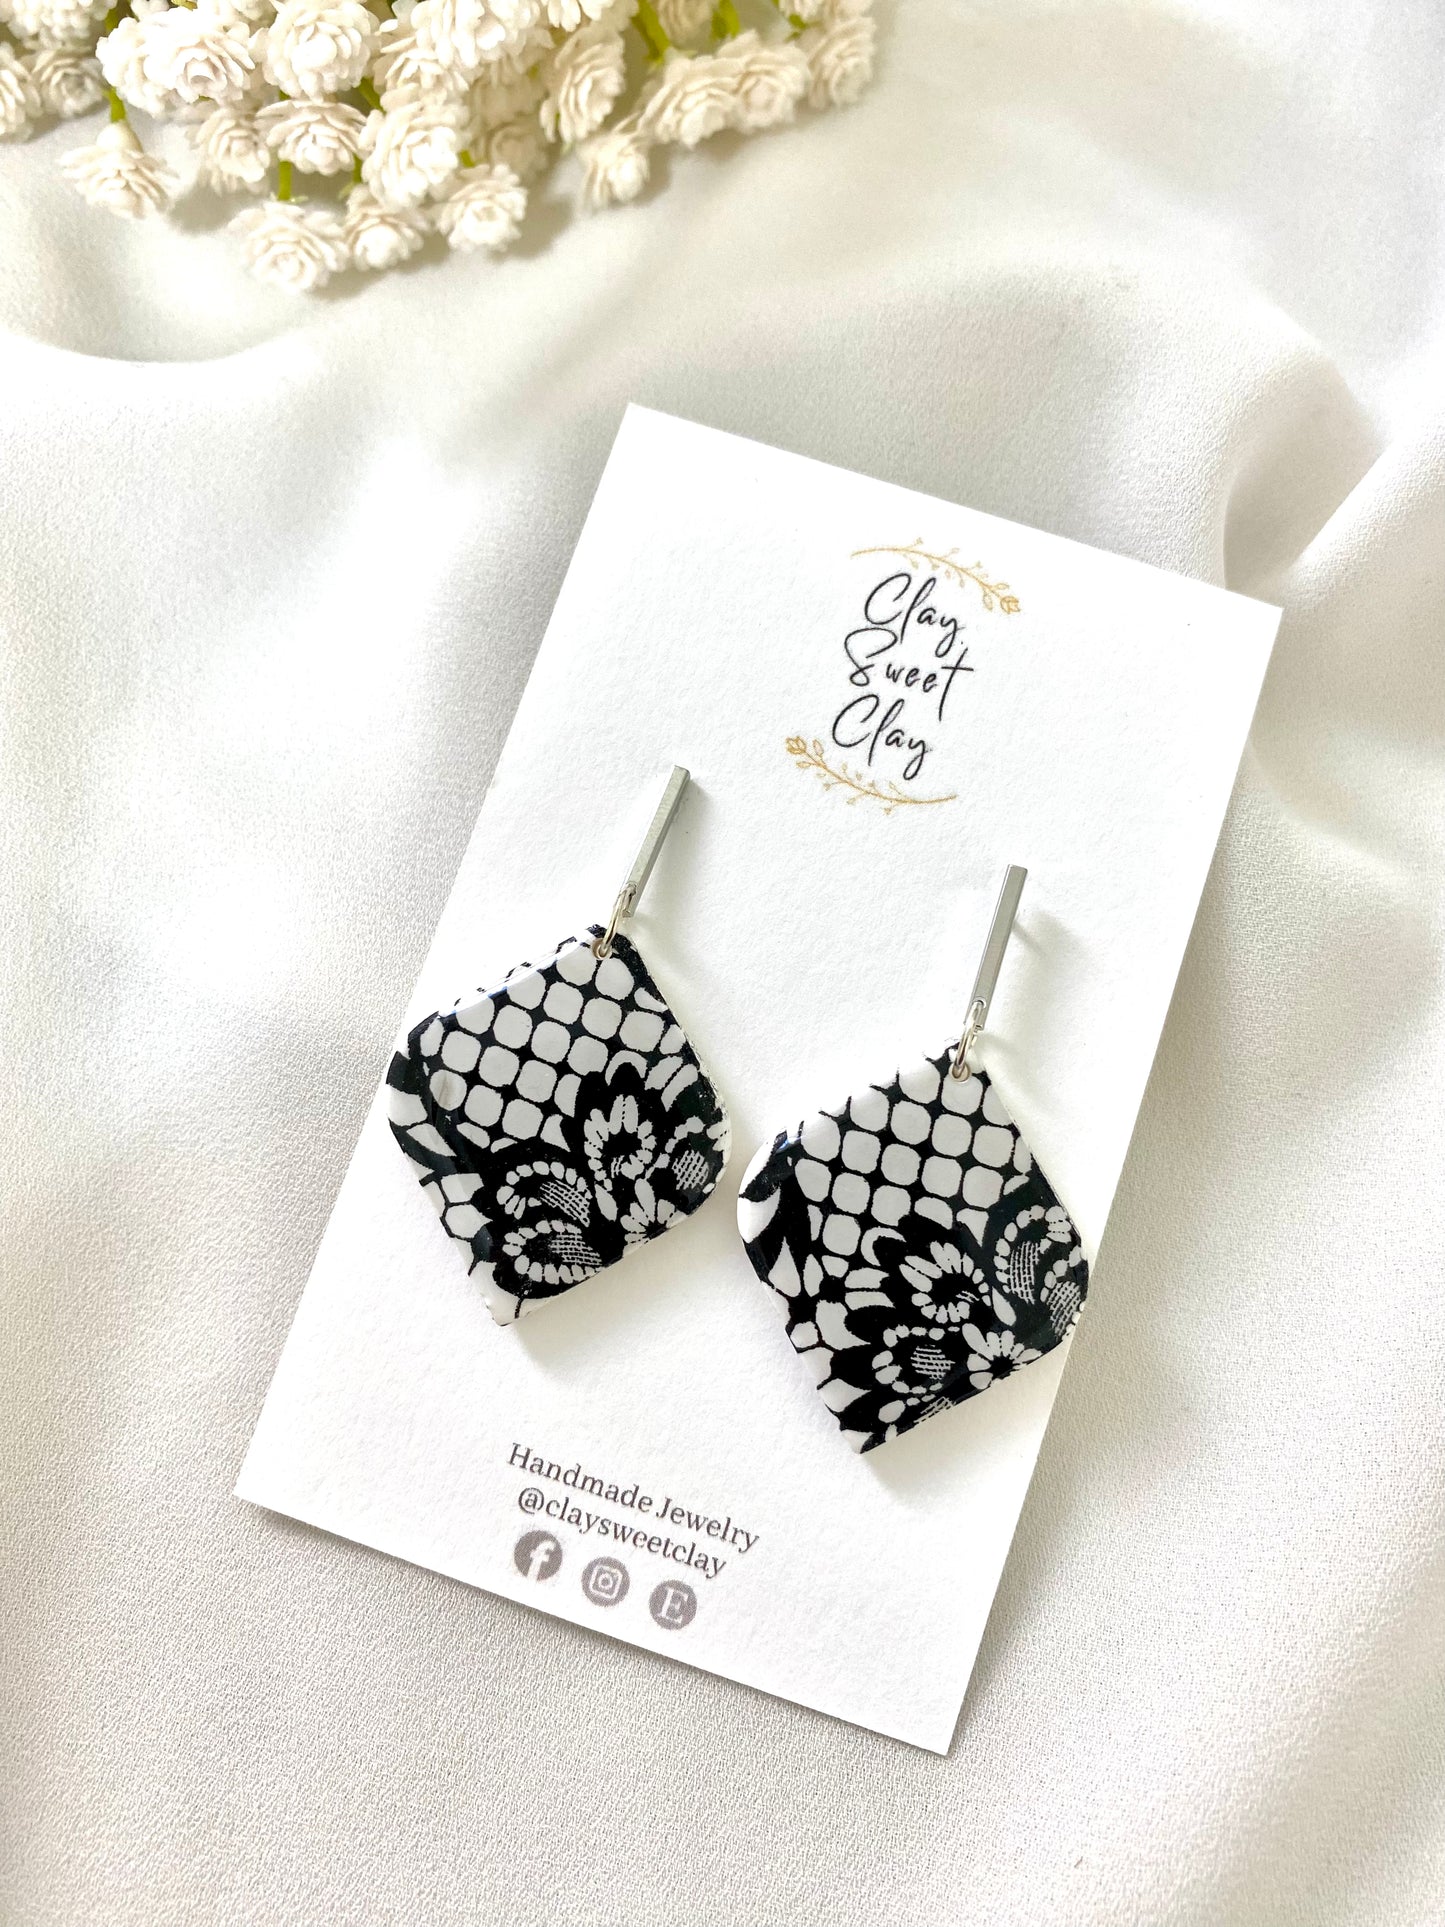 Black & White Lace Earrings - Rounded Square